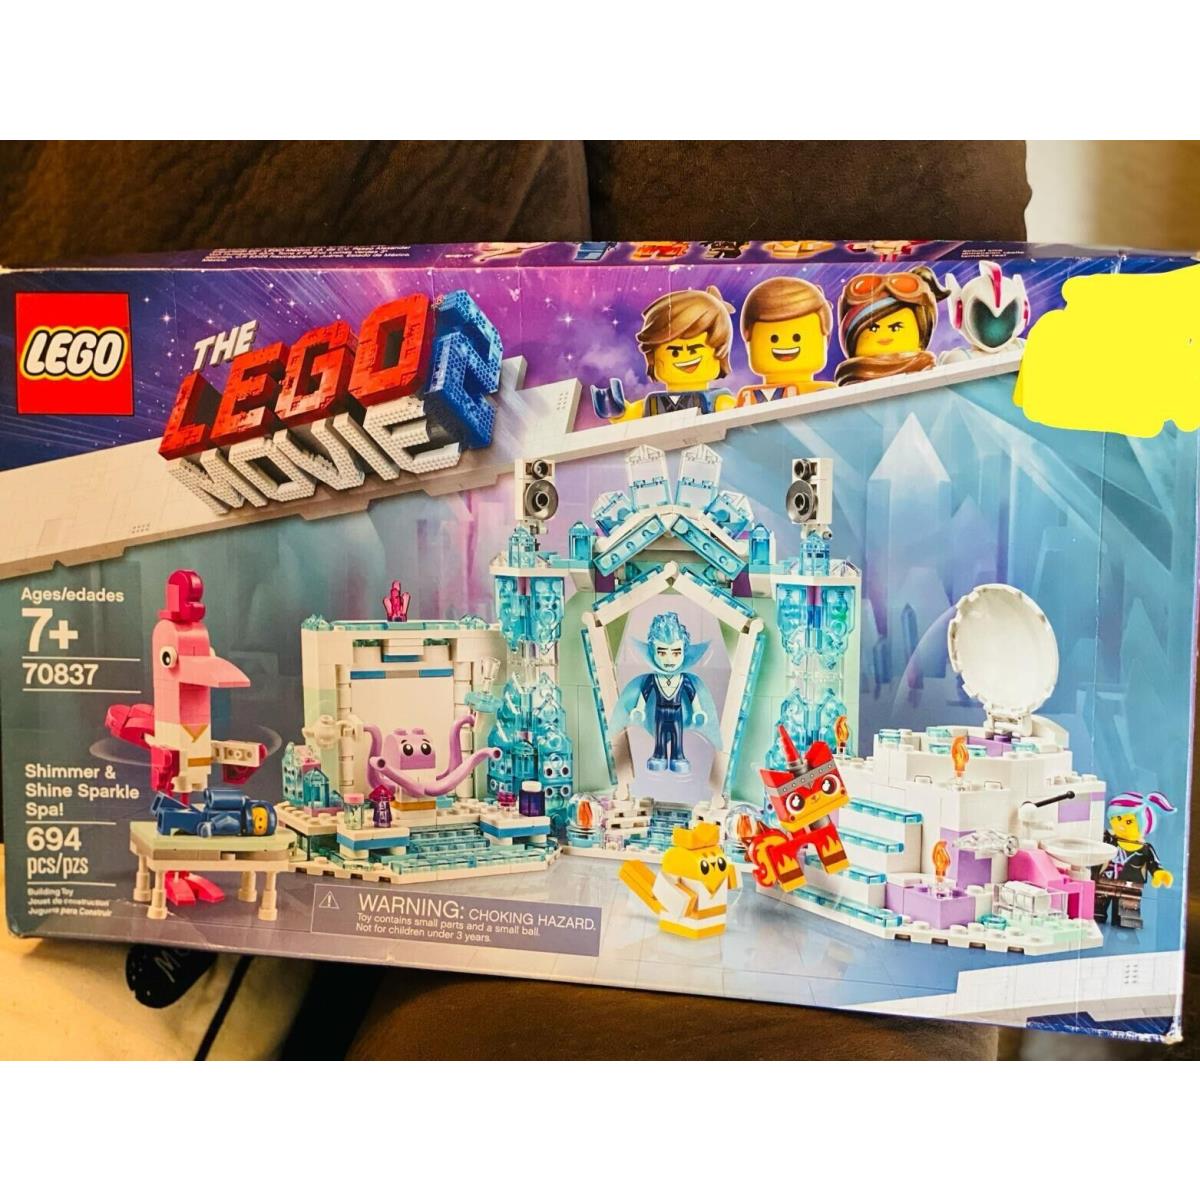 The Lego Movie 2 Shimmer and Shine Sparkle Spa 70837